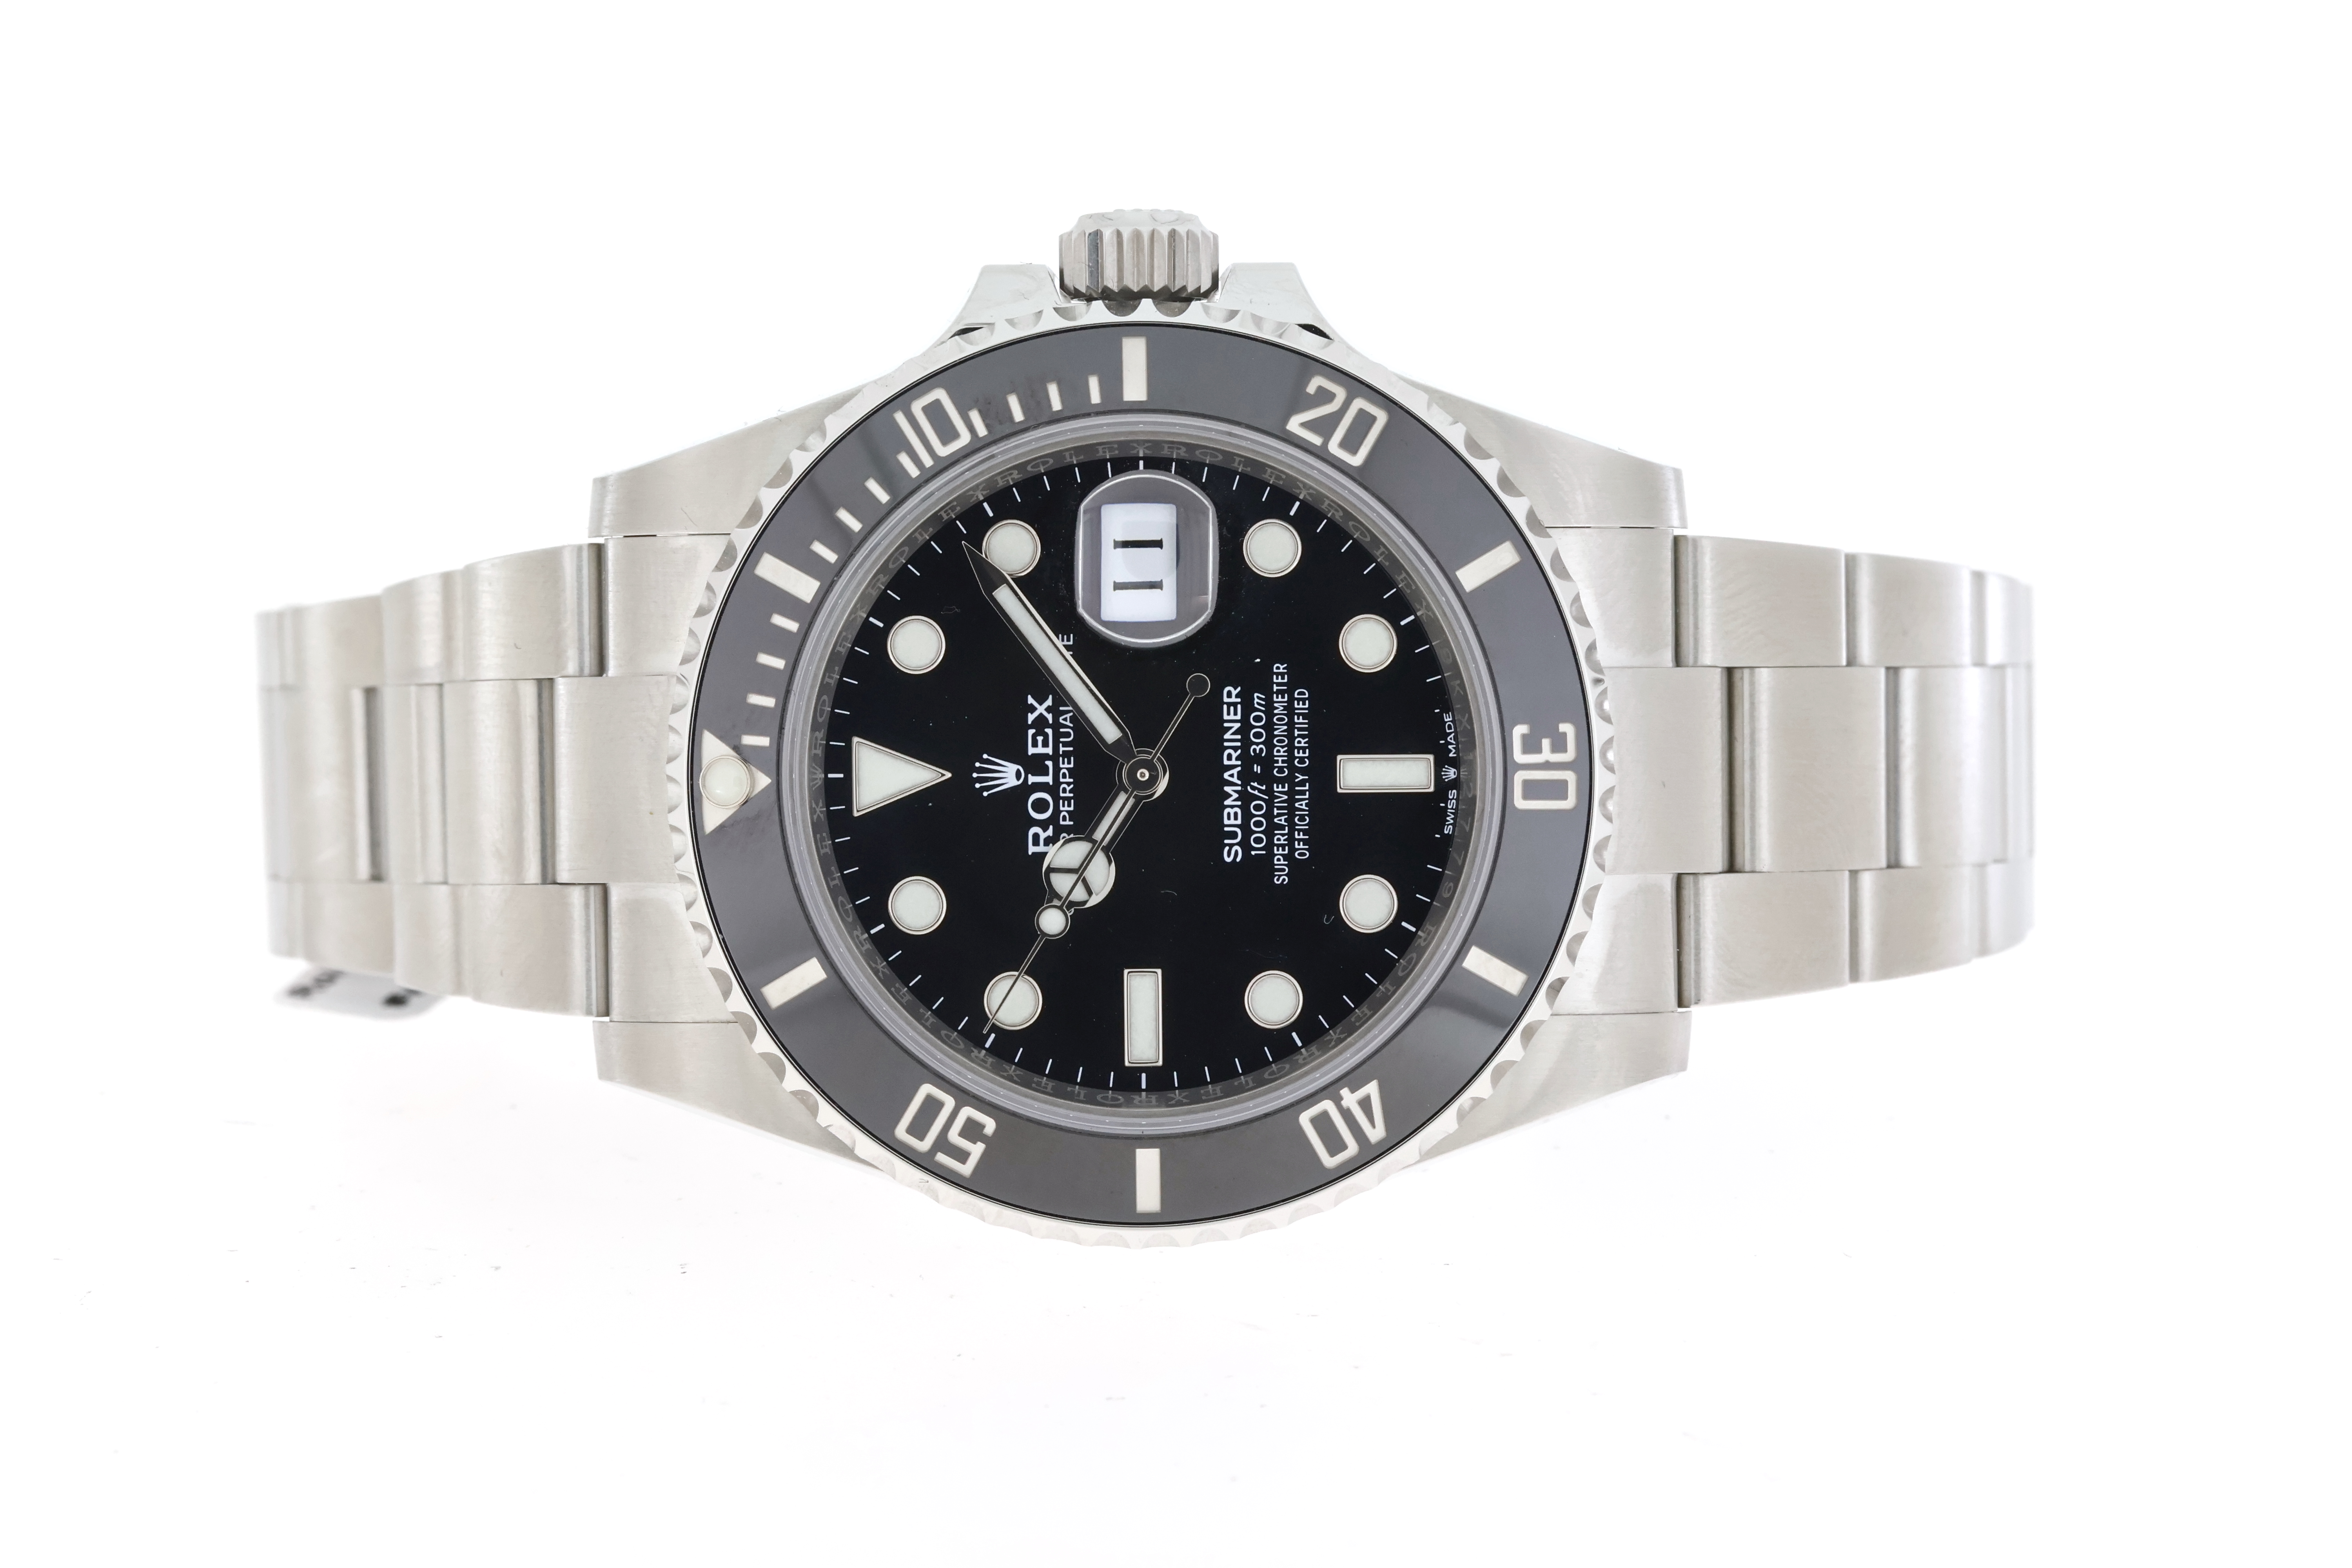 Rolex Submariner Date Automatic Reference 126610 with Box and Papers 2020 - Image 2 of 2